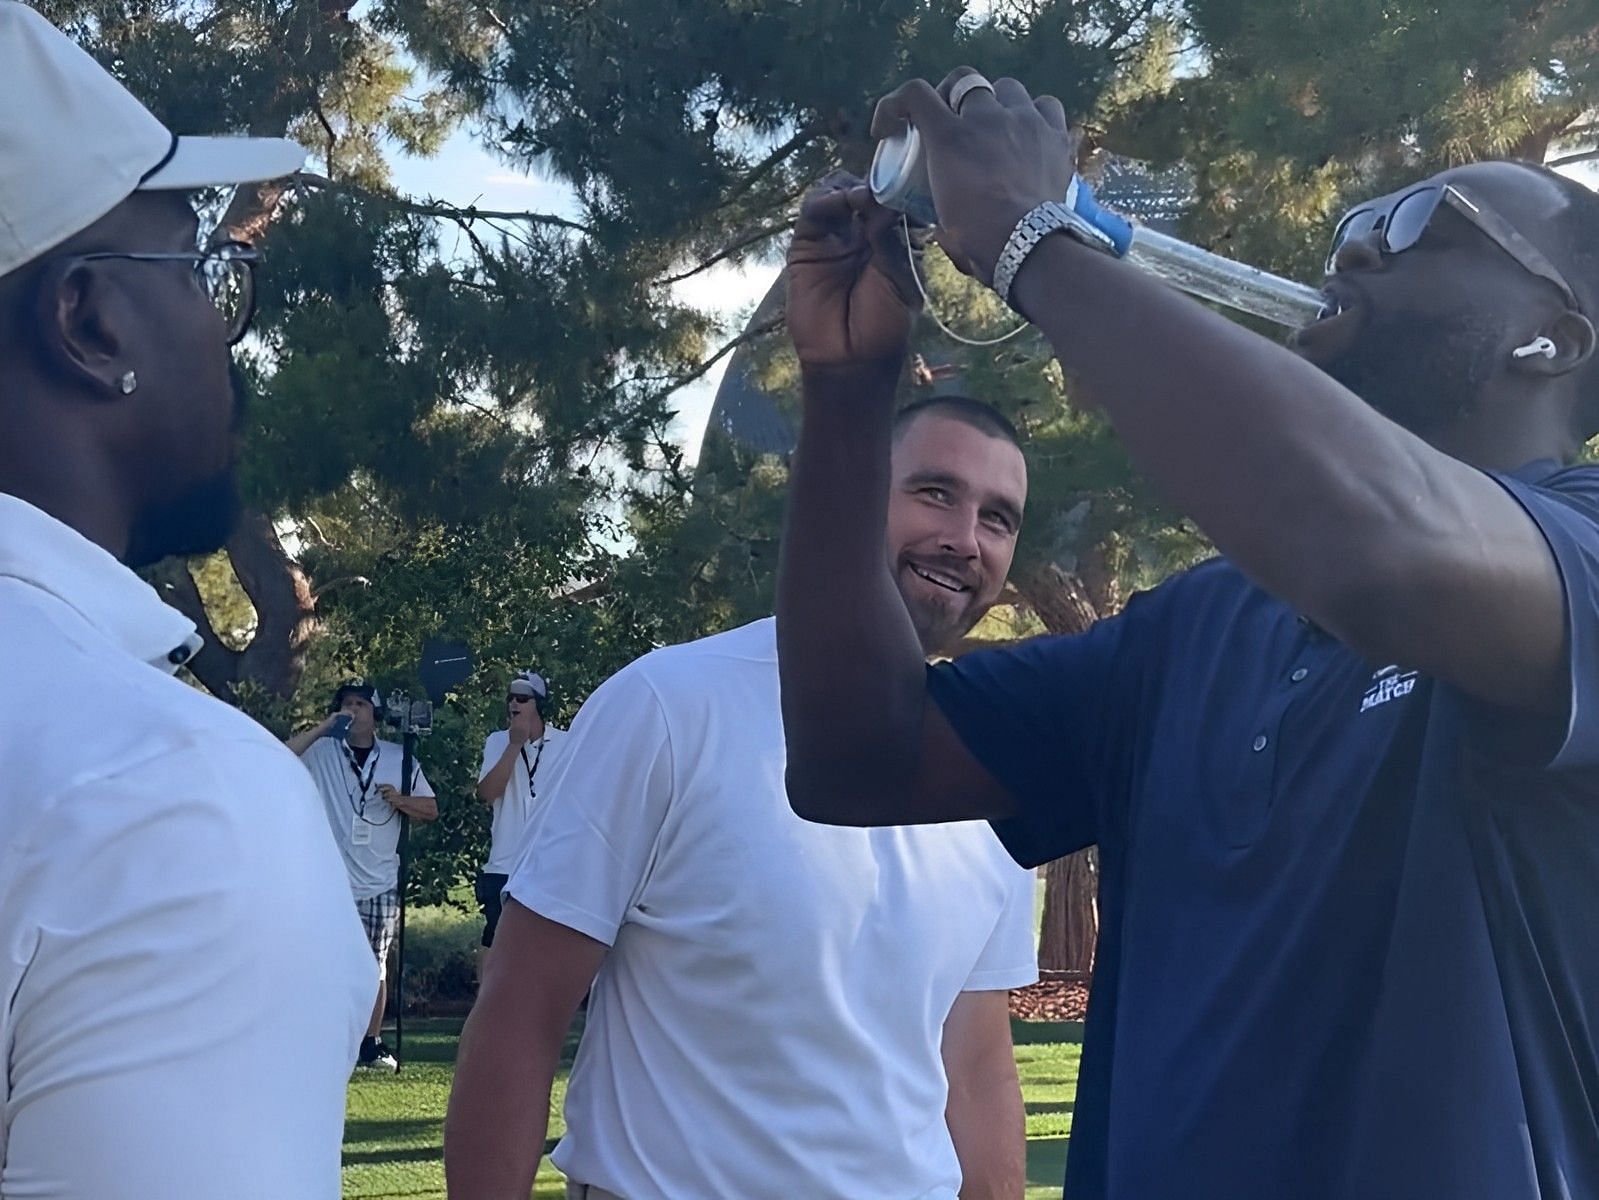 Golden State Warriors forward Draymond Green attempting to chug a beer during Capital One&rsquo;s &ldquo;The Match&rdquo; on Thursday night.